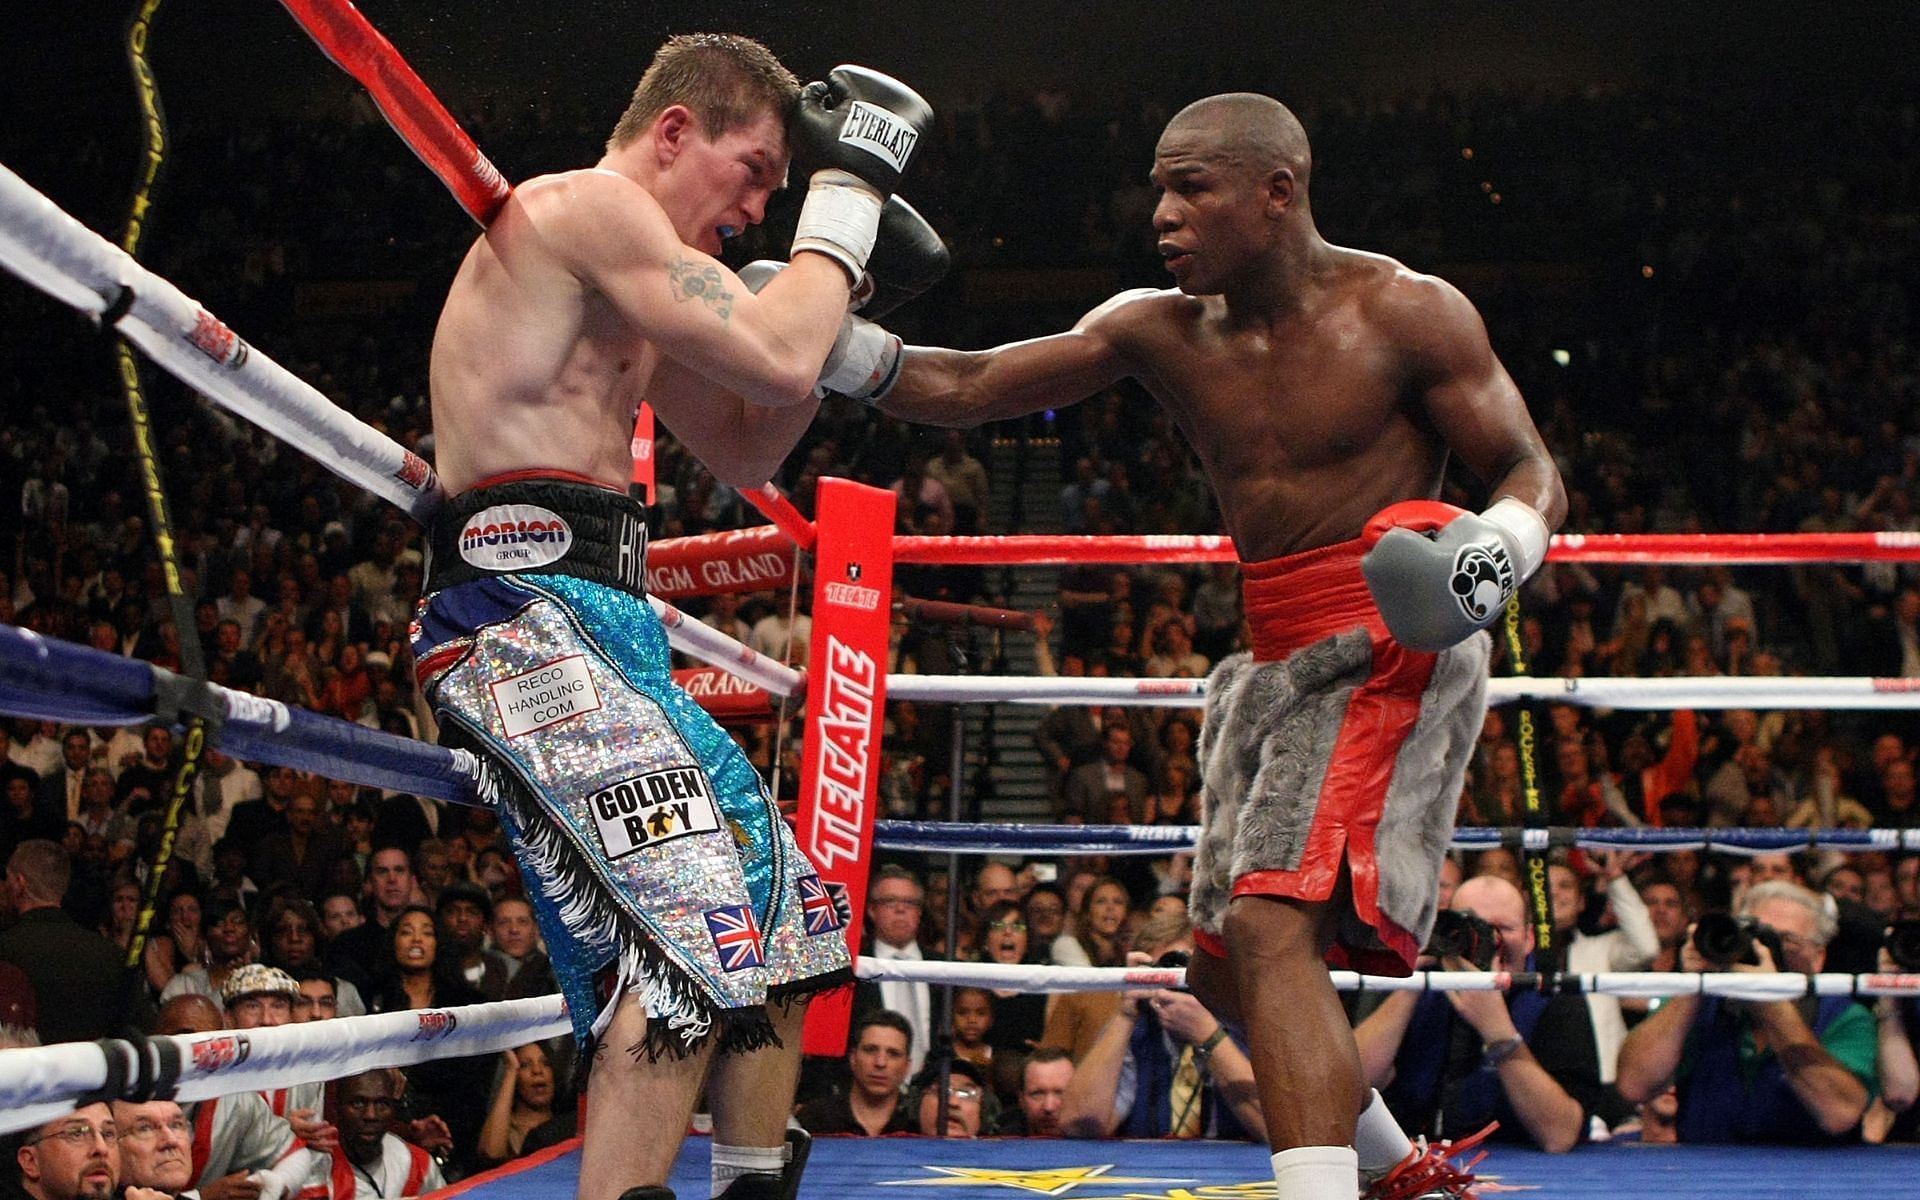 Ricky Hatton (left) and Floyd Mayweather Jr. (right)